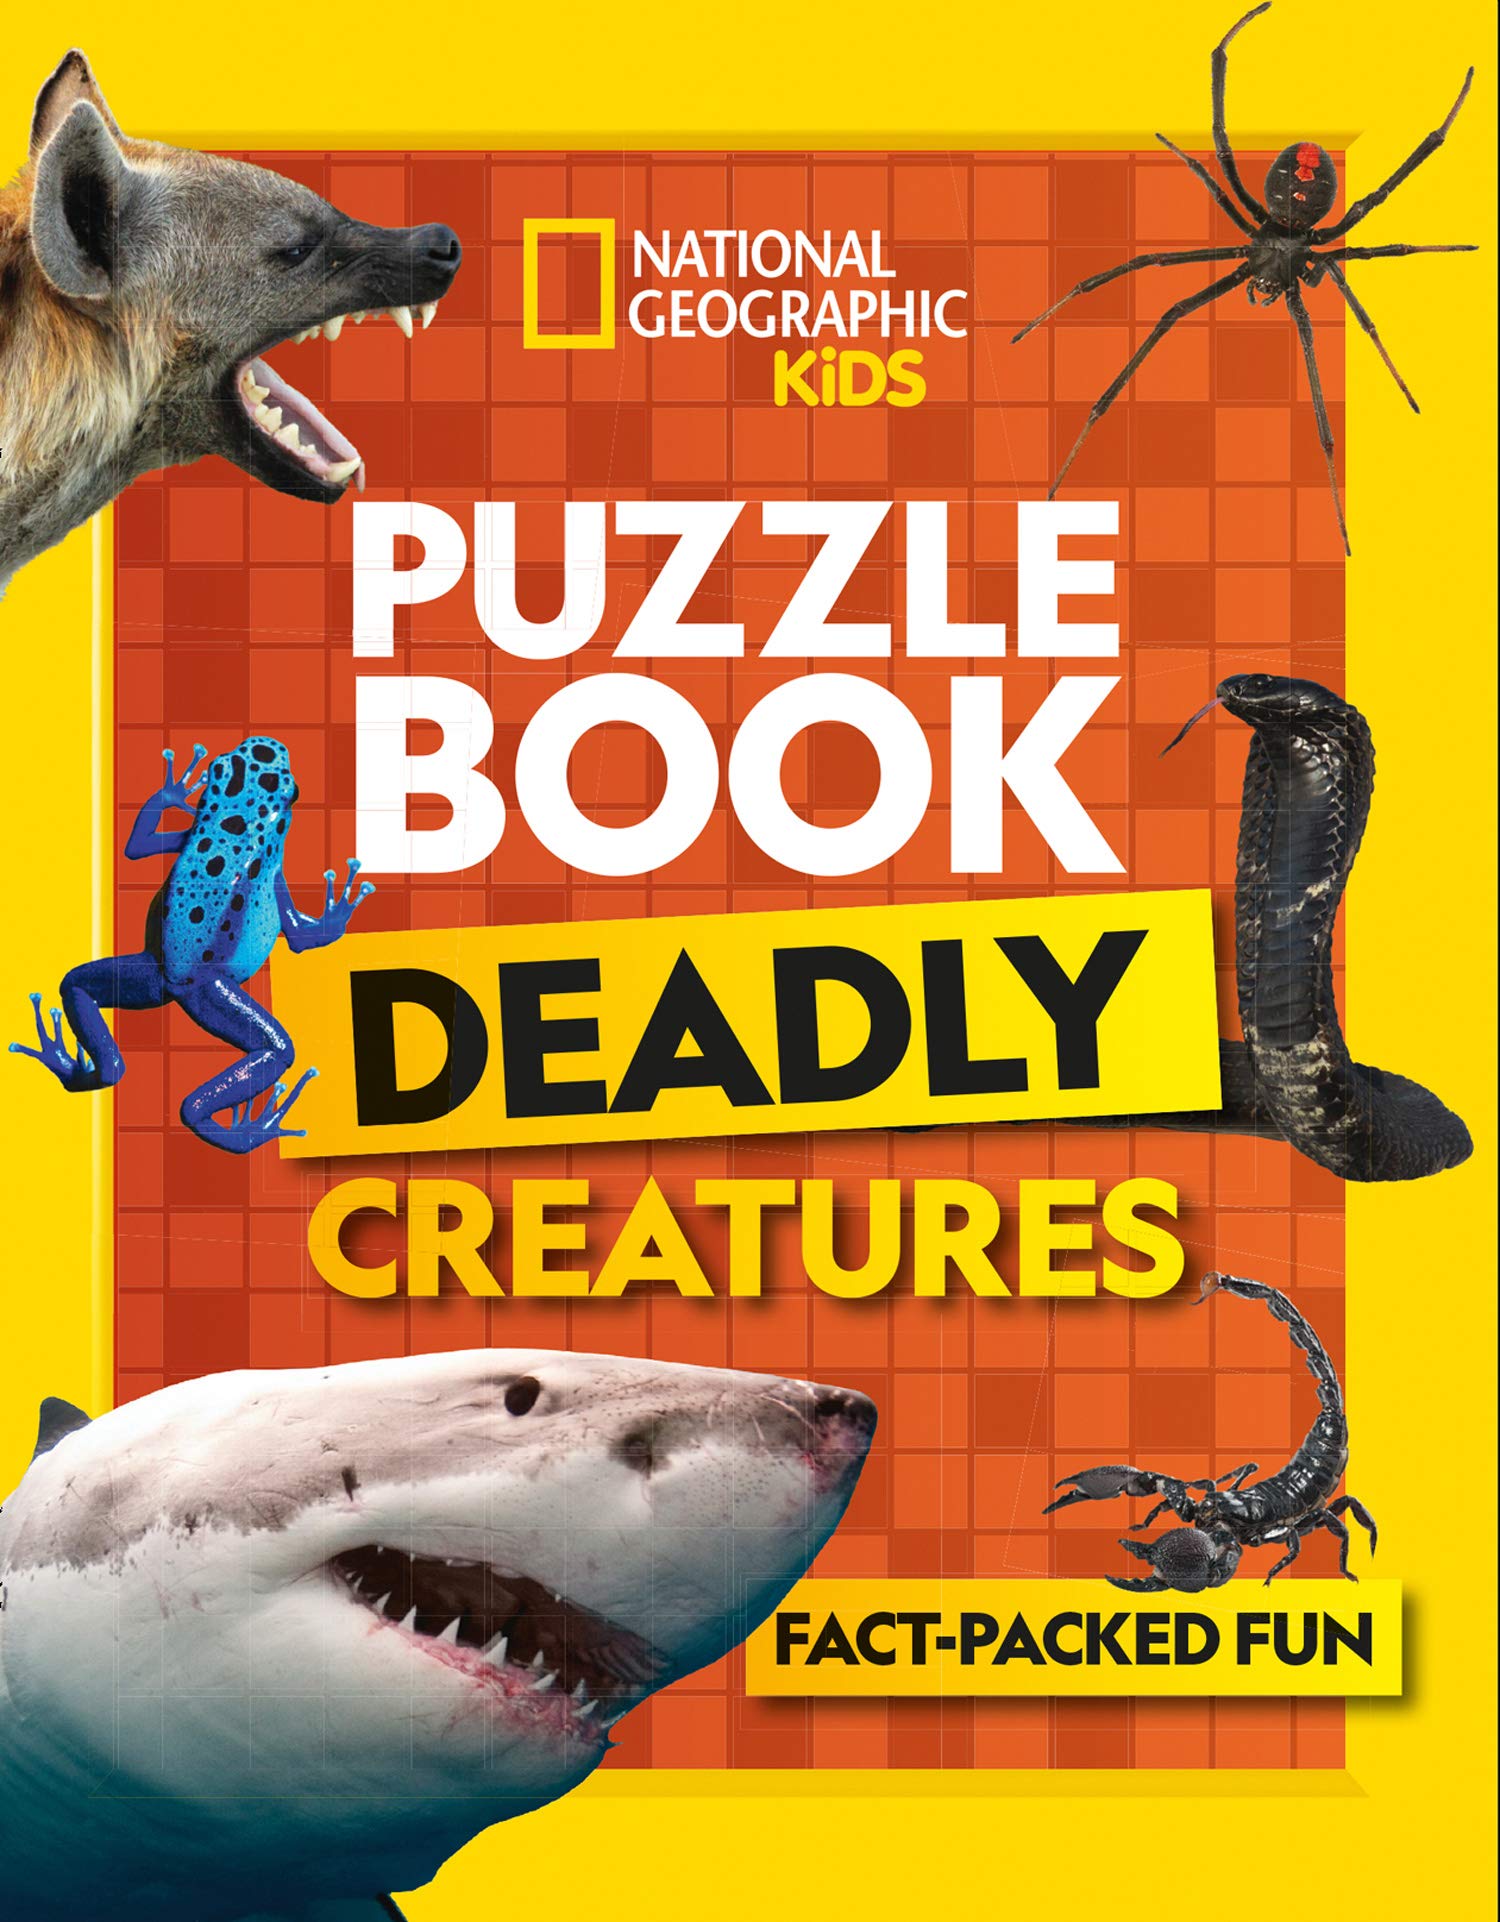 Puzzle Book Deadly Creatures: Brain-tickling quizzes, sudokus, crosswords and wordsearches (National Geographic Kids) - Paperback